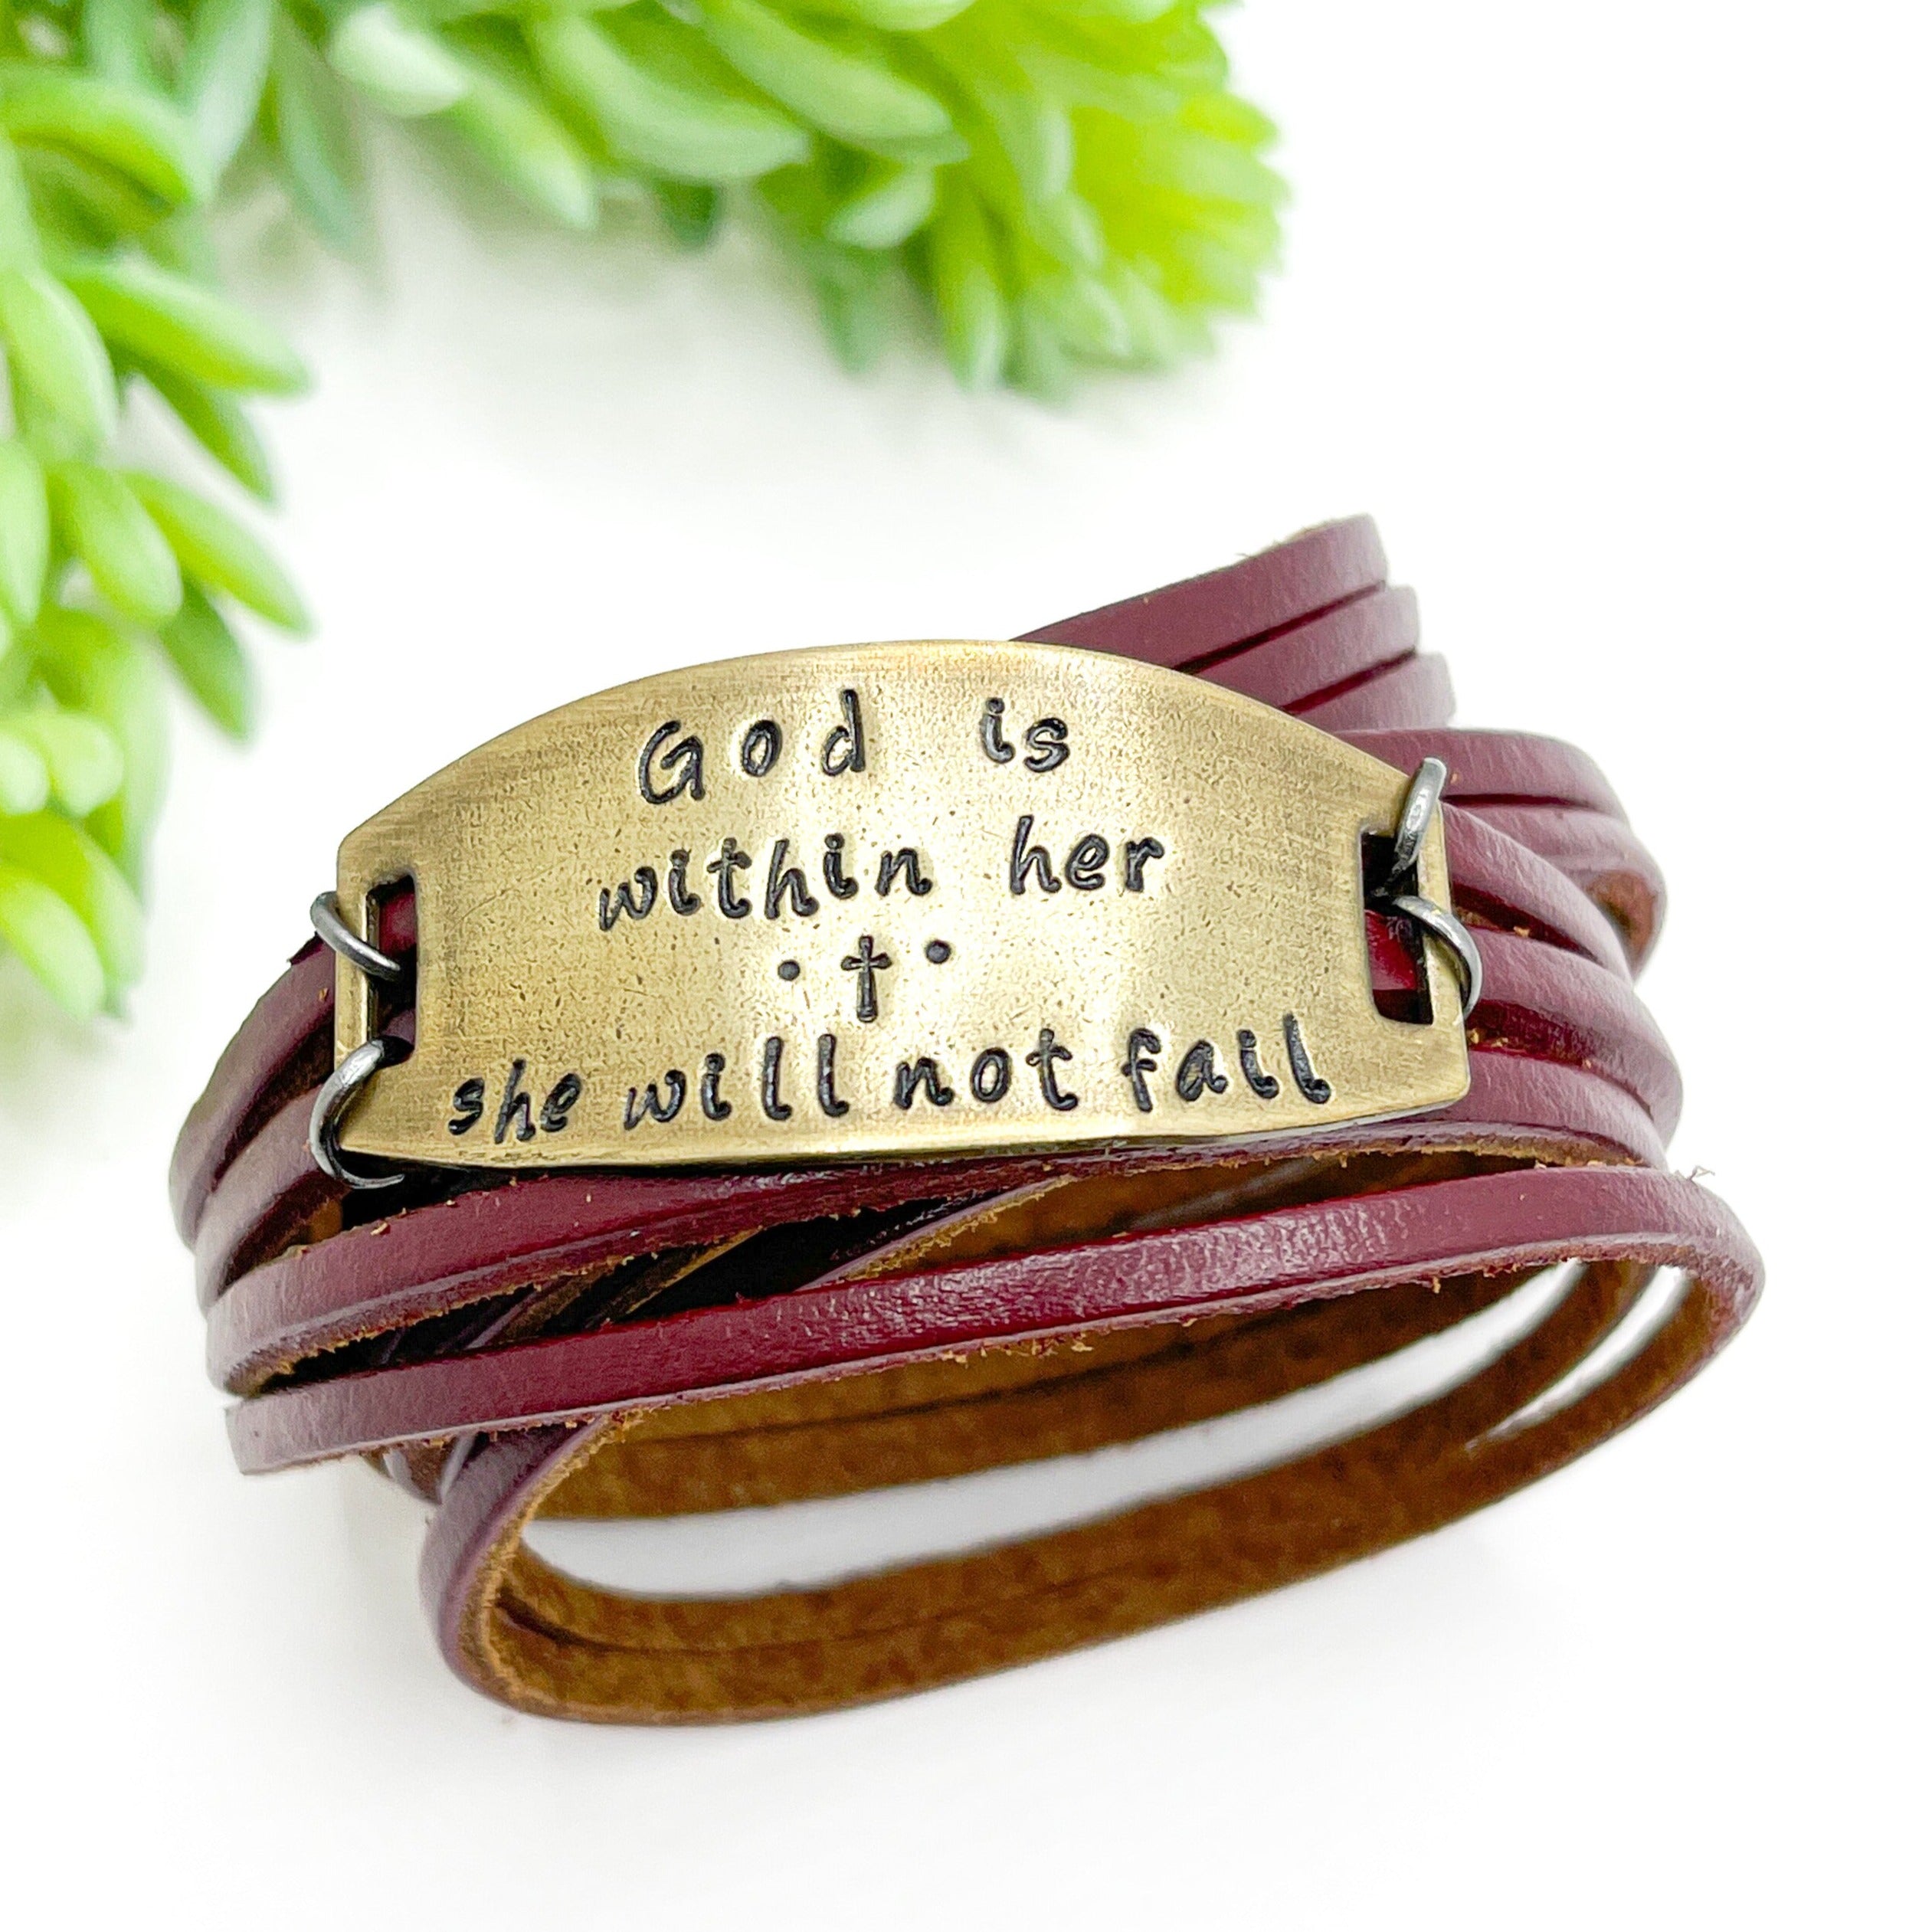 GOD IS WITHIN HER Leather Wrap & Bronze Bracelet | 12 color options | Adjustable Leather Wrap Create Hope Cuffs 